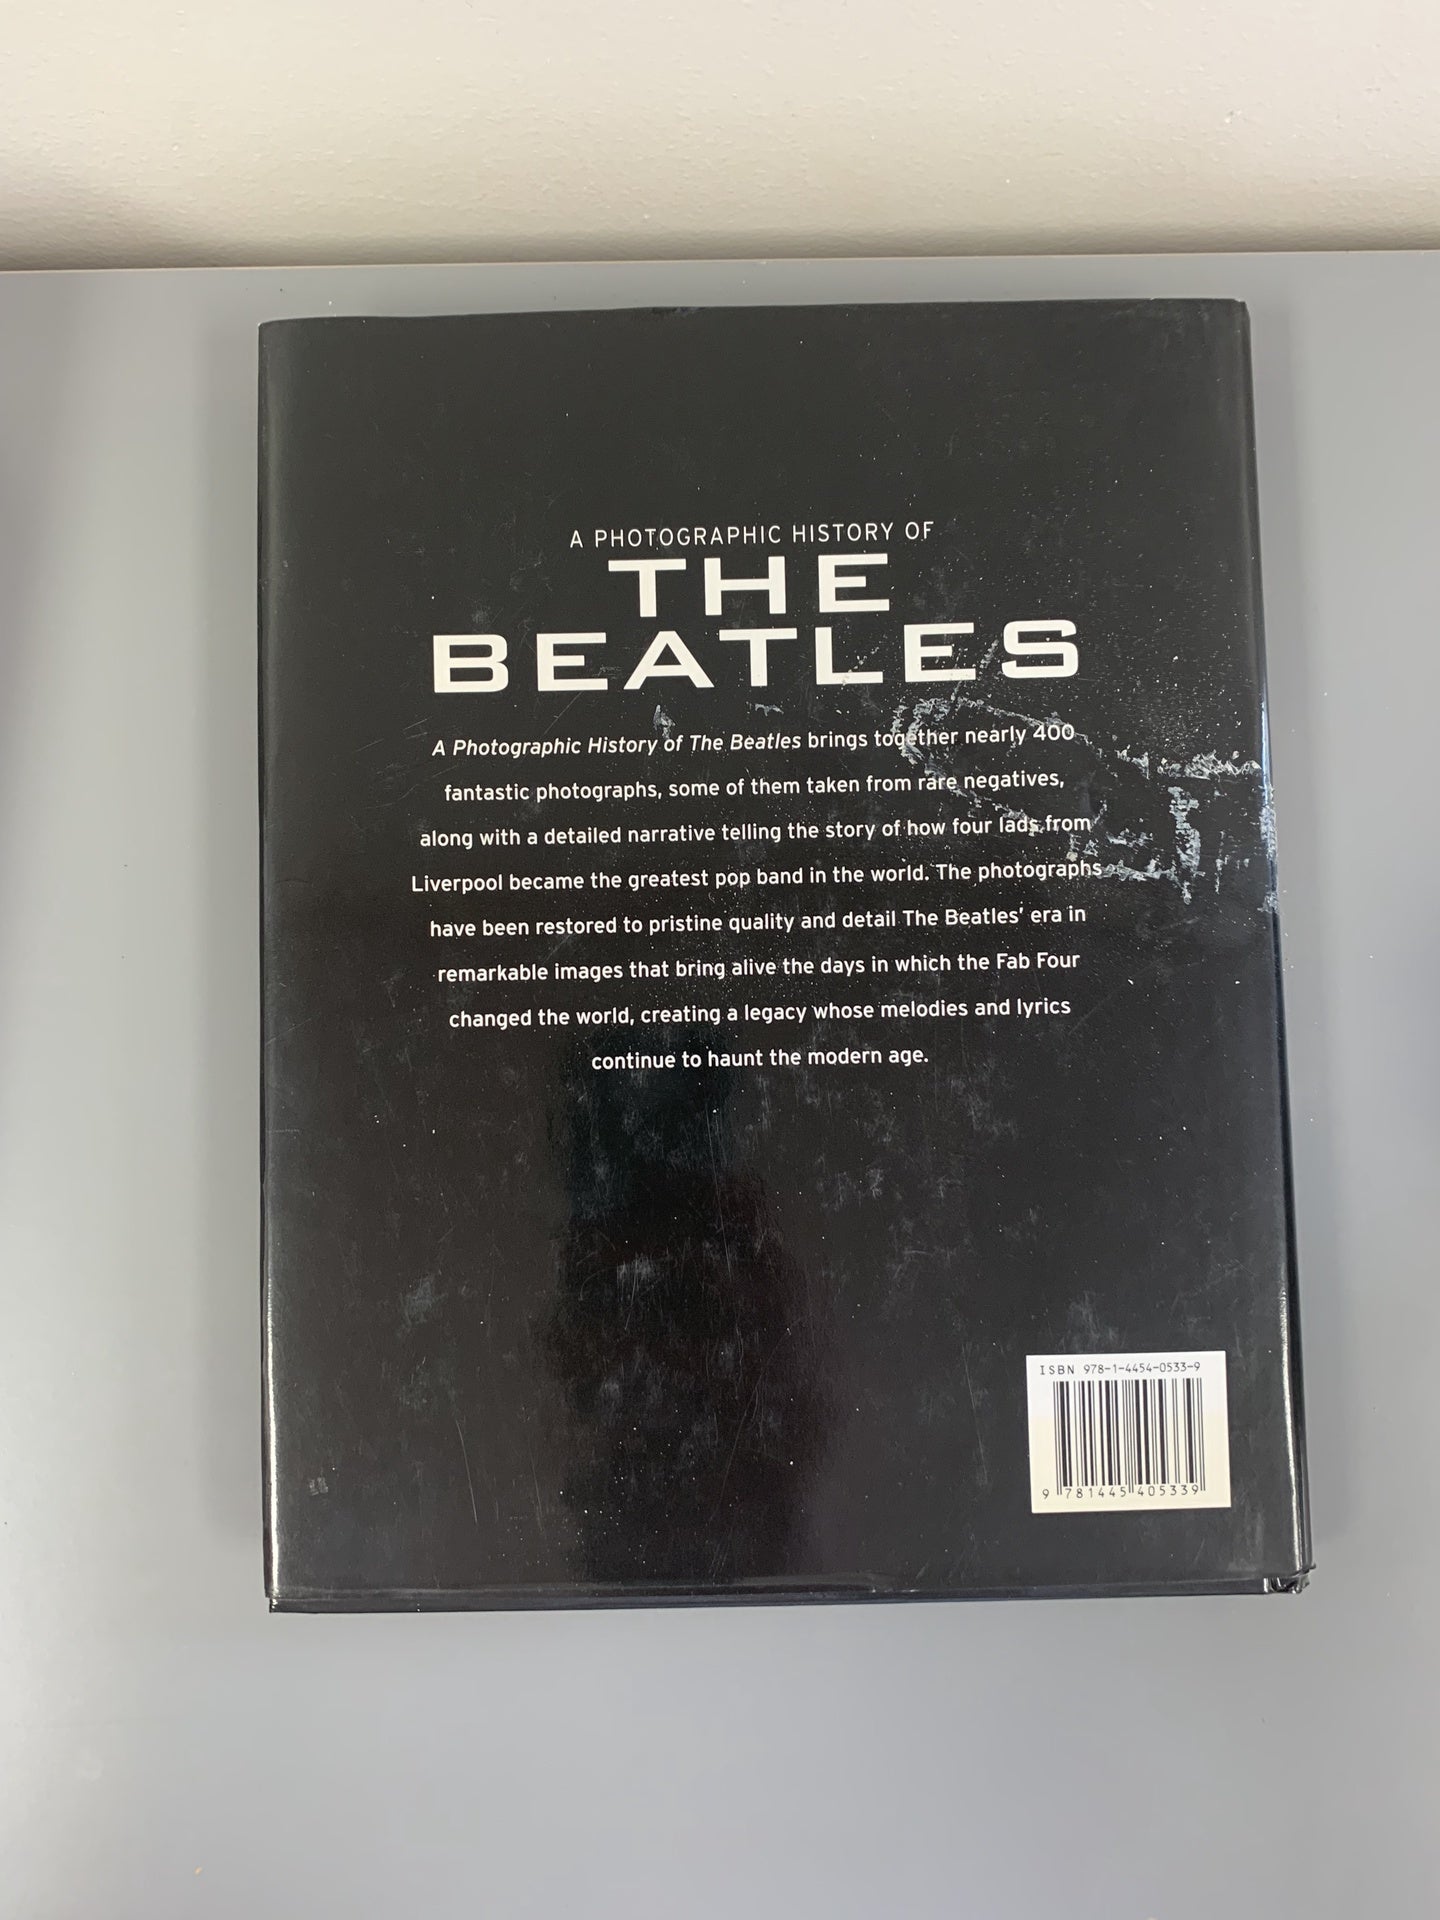 The Beatles - A Photographic History book